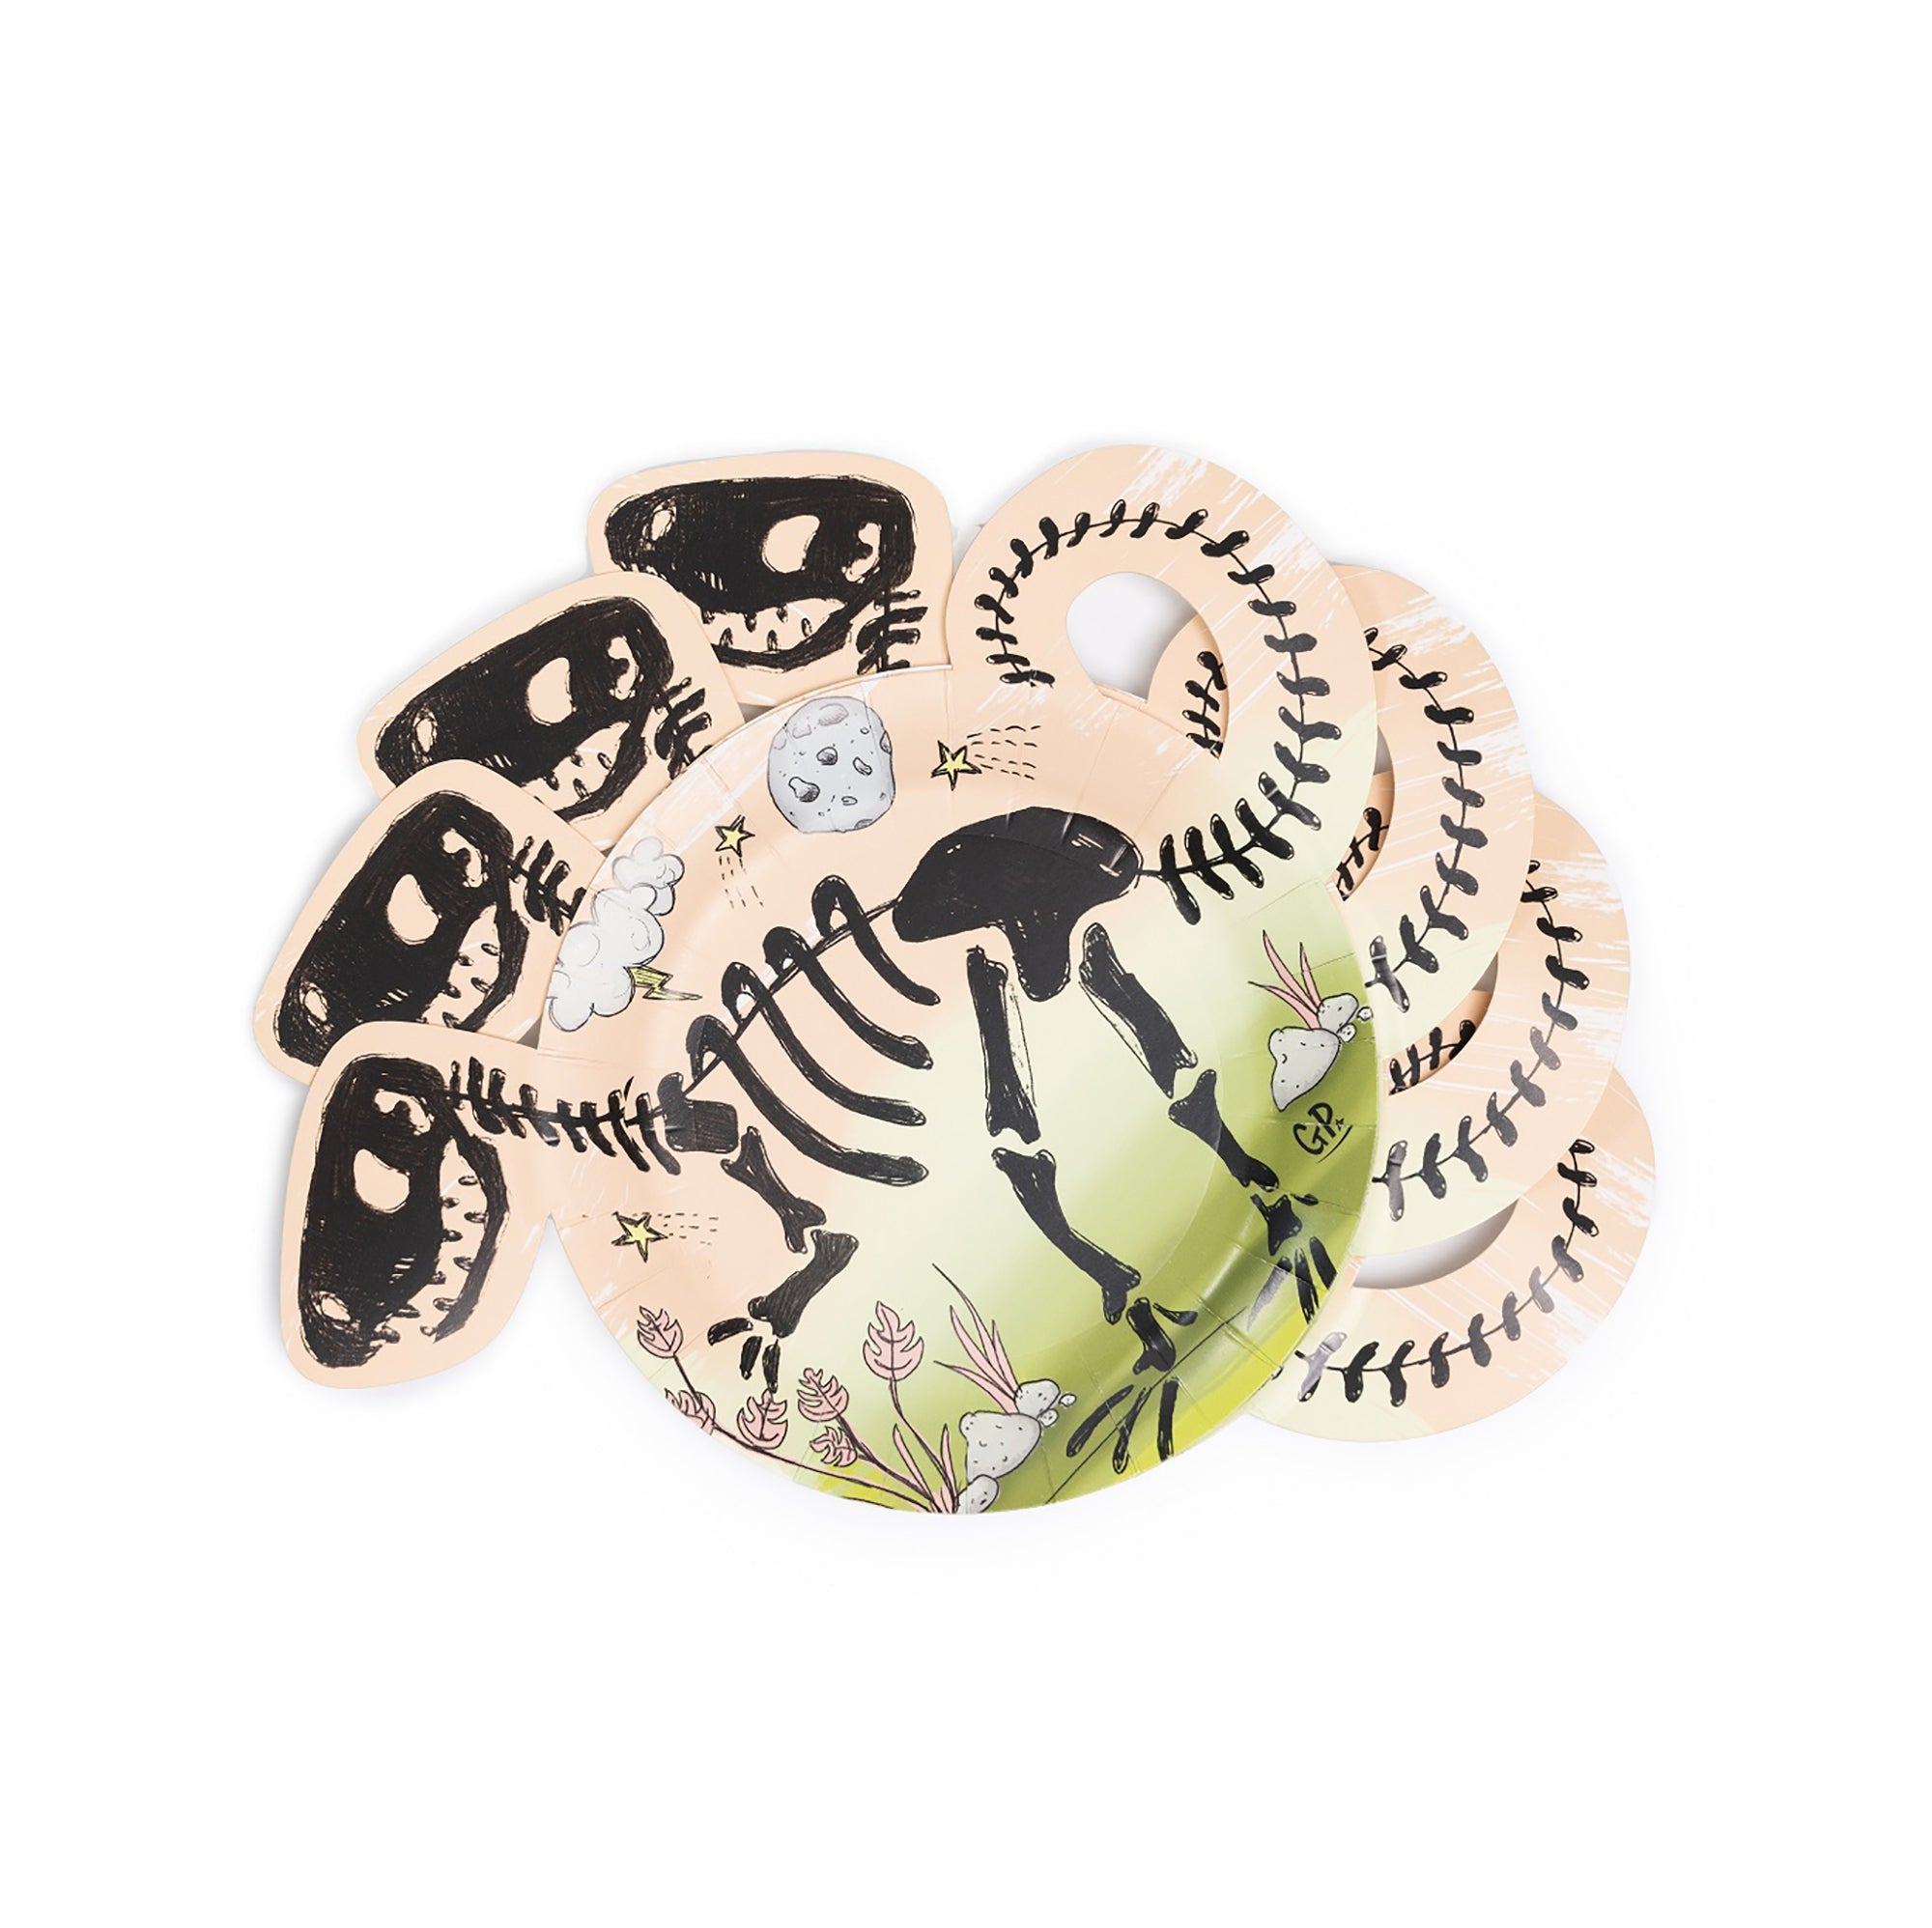 Dinosaur 8 Round Paper Plates with Head and Tail 7in